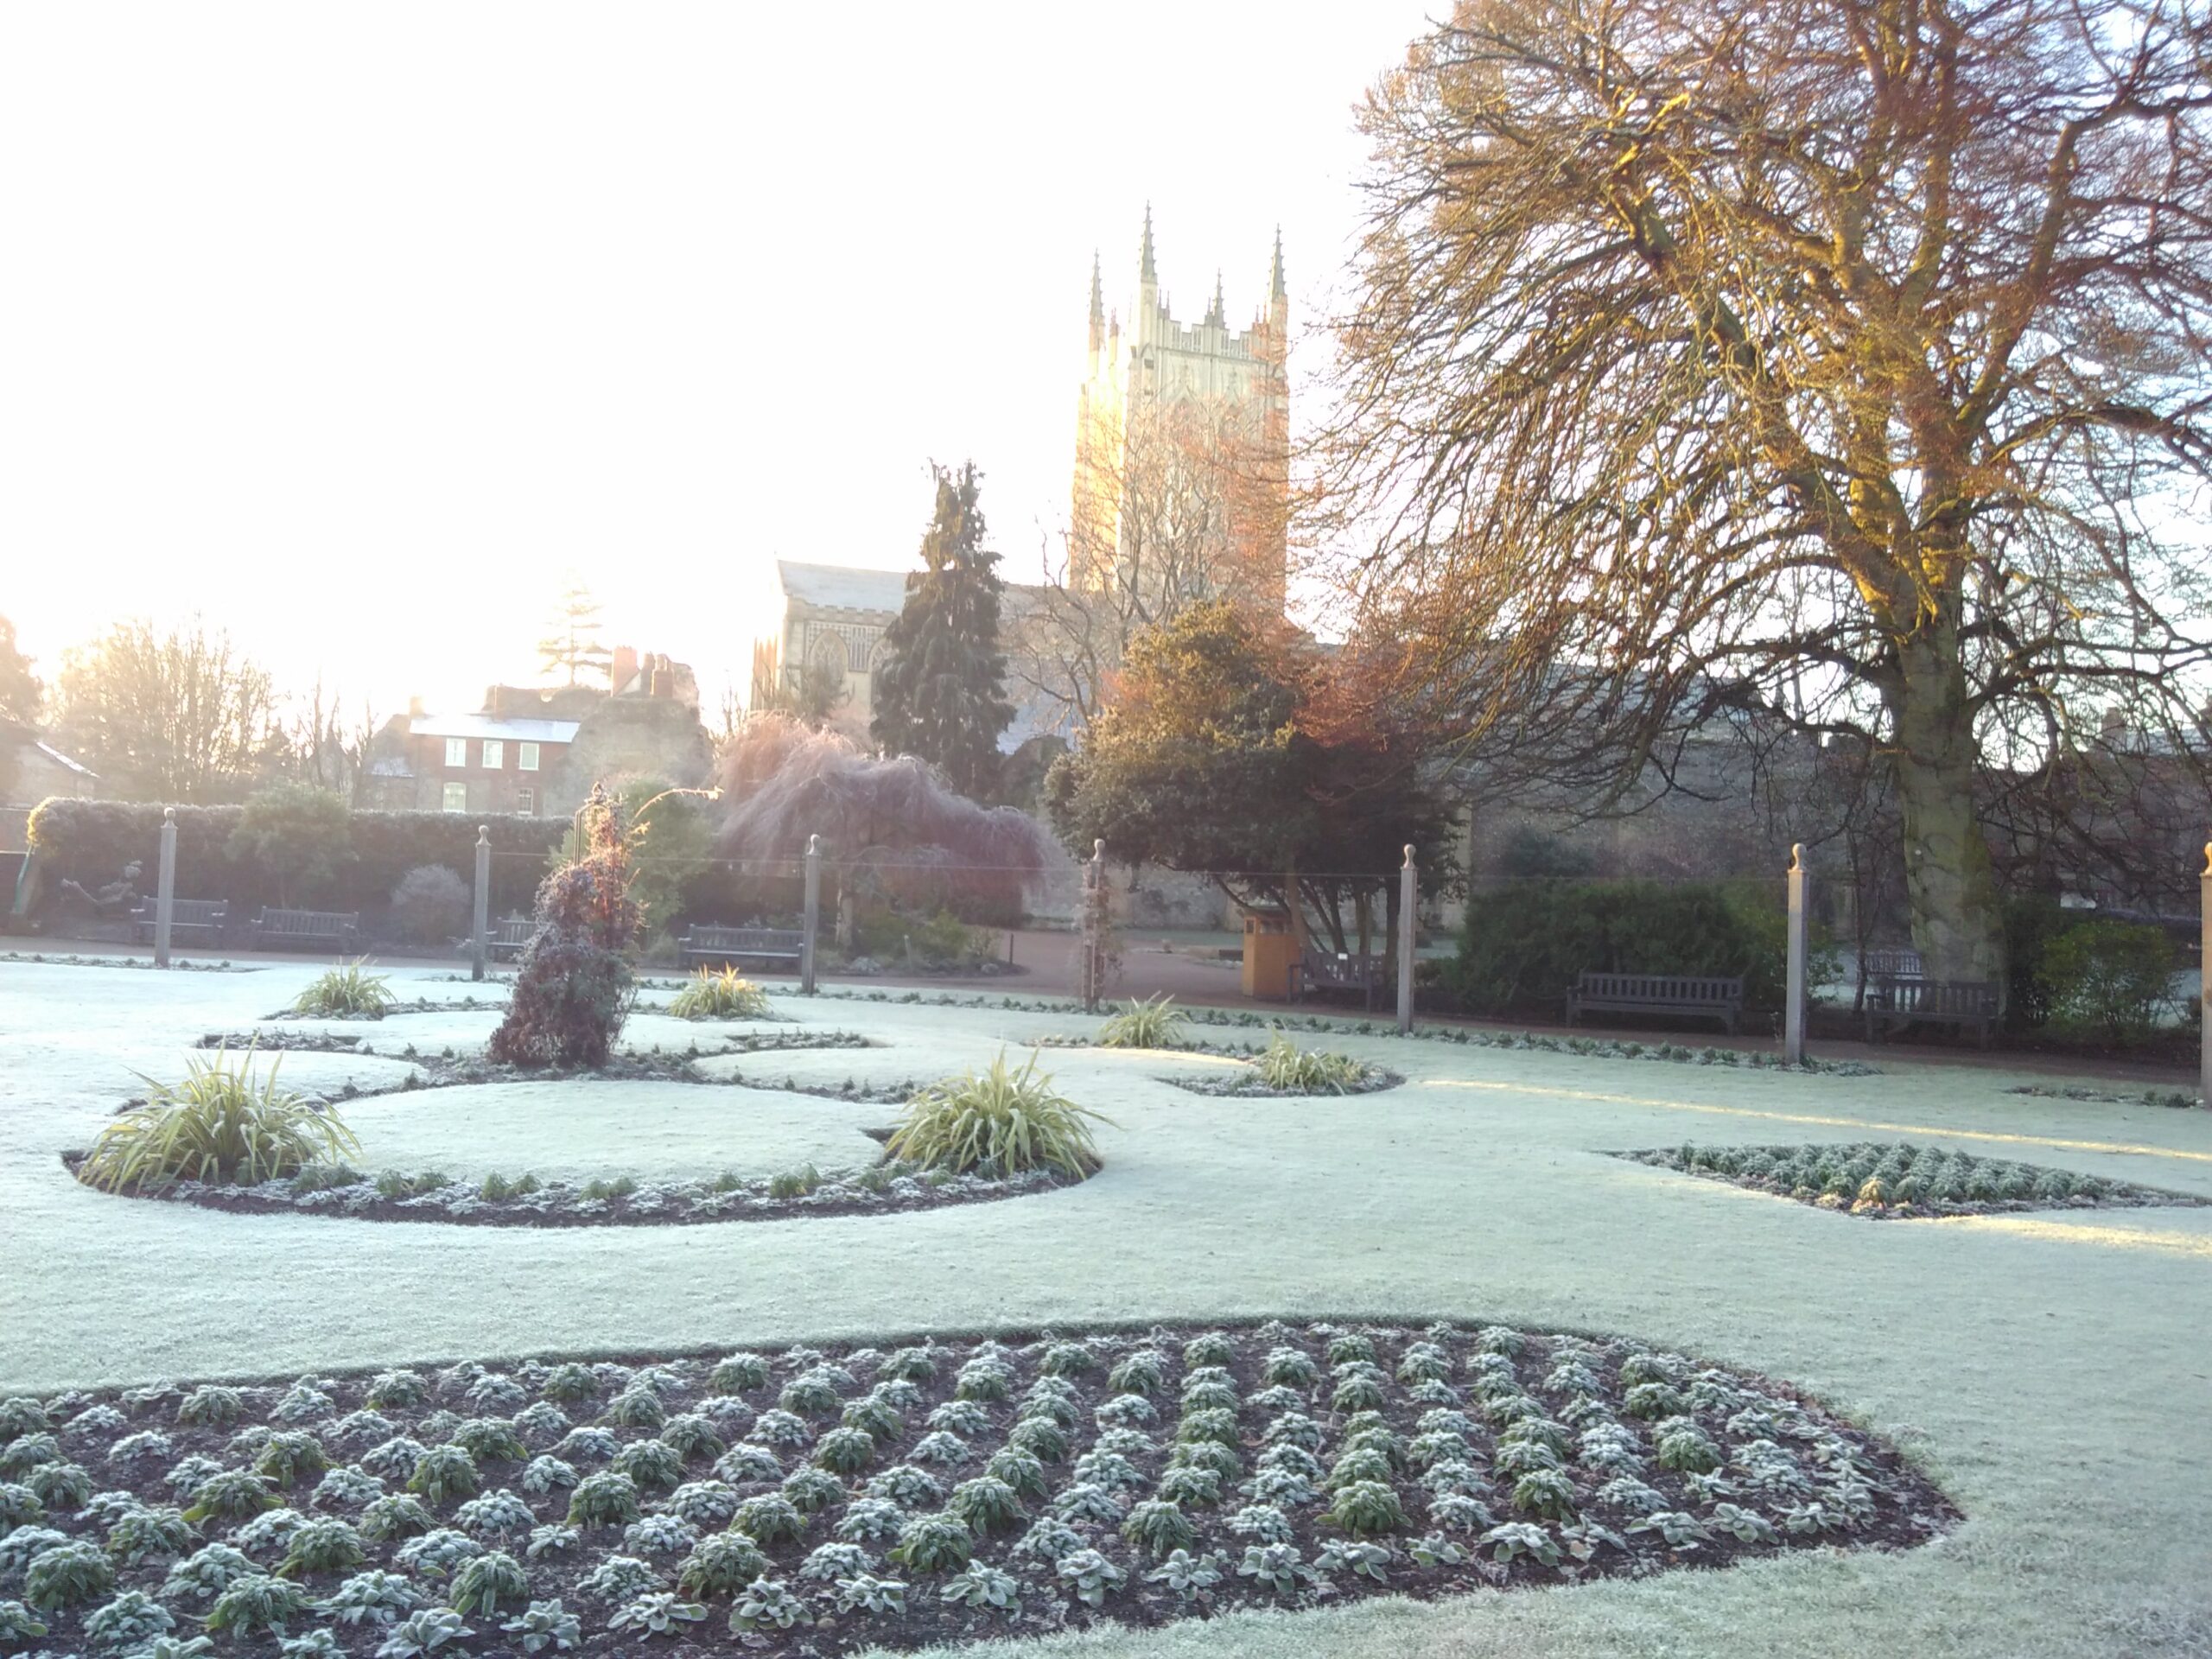 Bright winter sun highlights a cathedral tower with frost-covered park lawns and ornamental beds in the foreground.